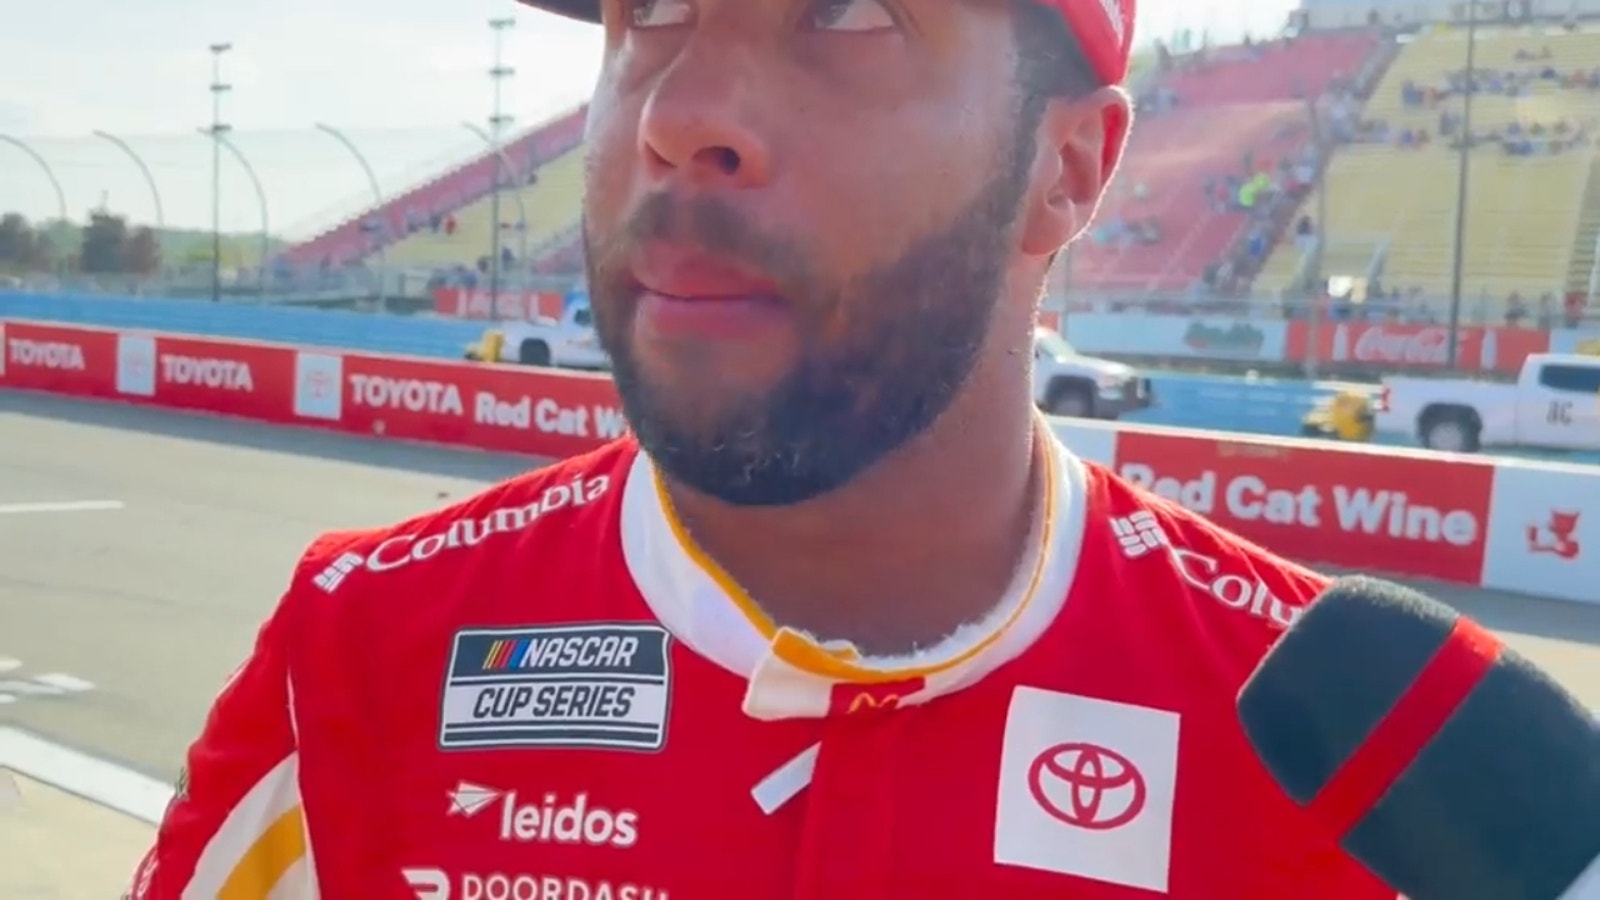 Bubba Wallace talks about his outlook for next week's race in Daytona